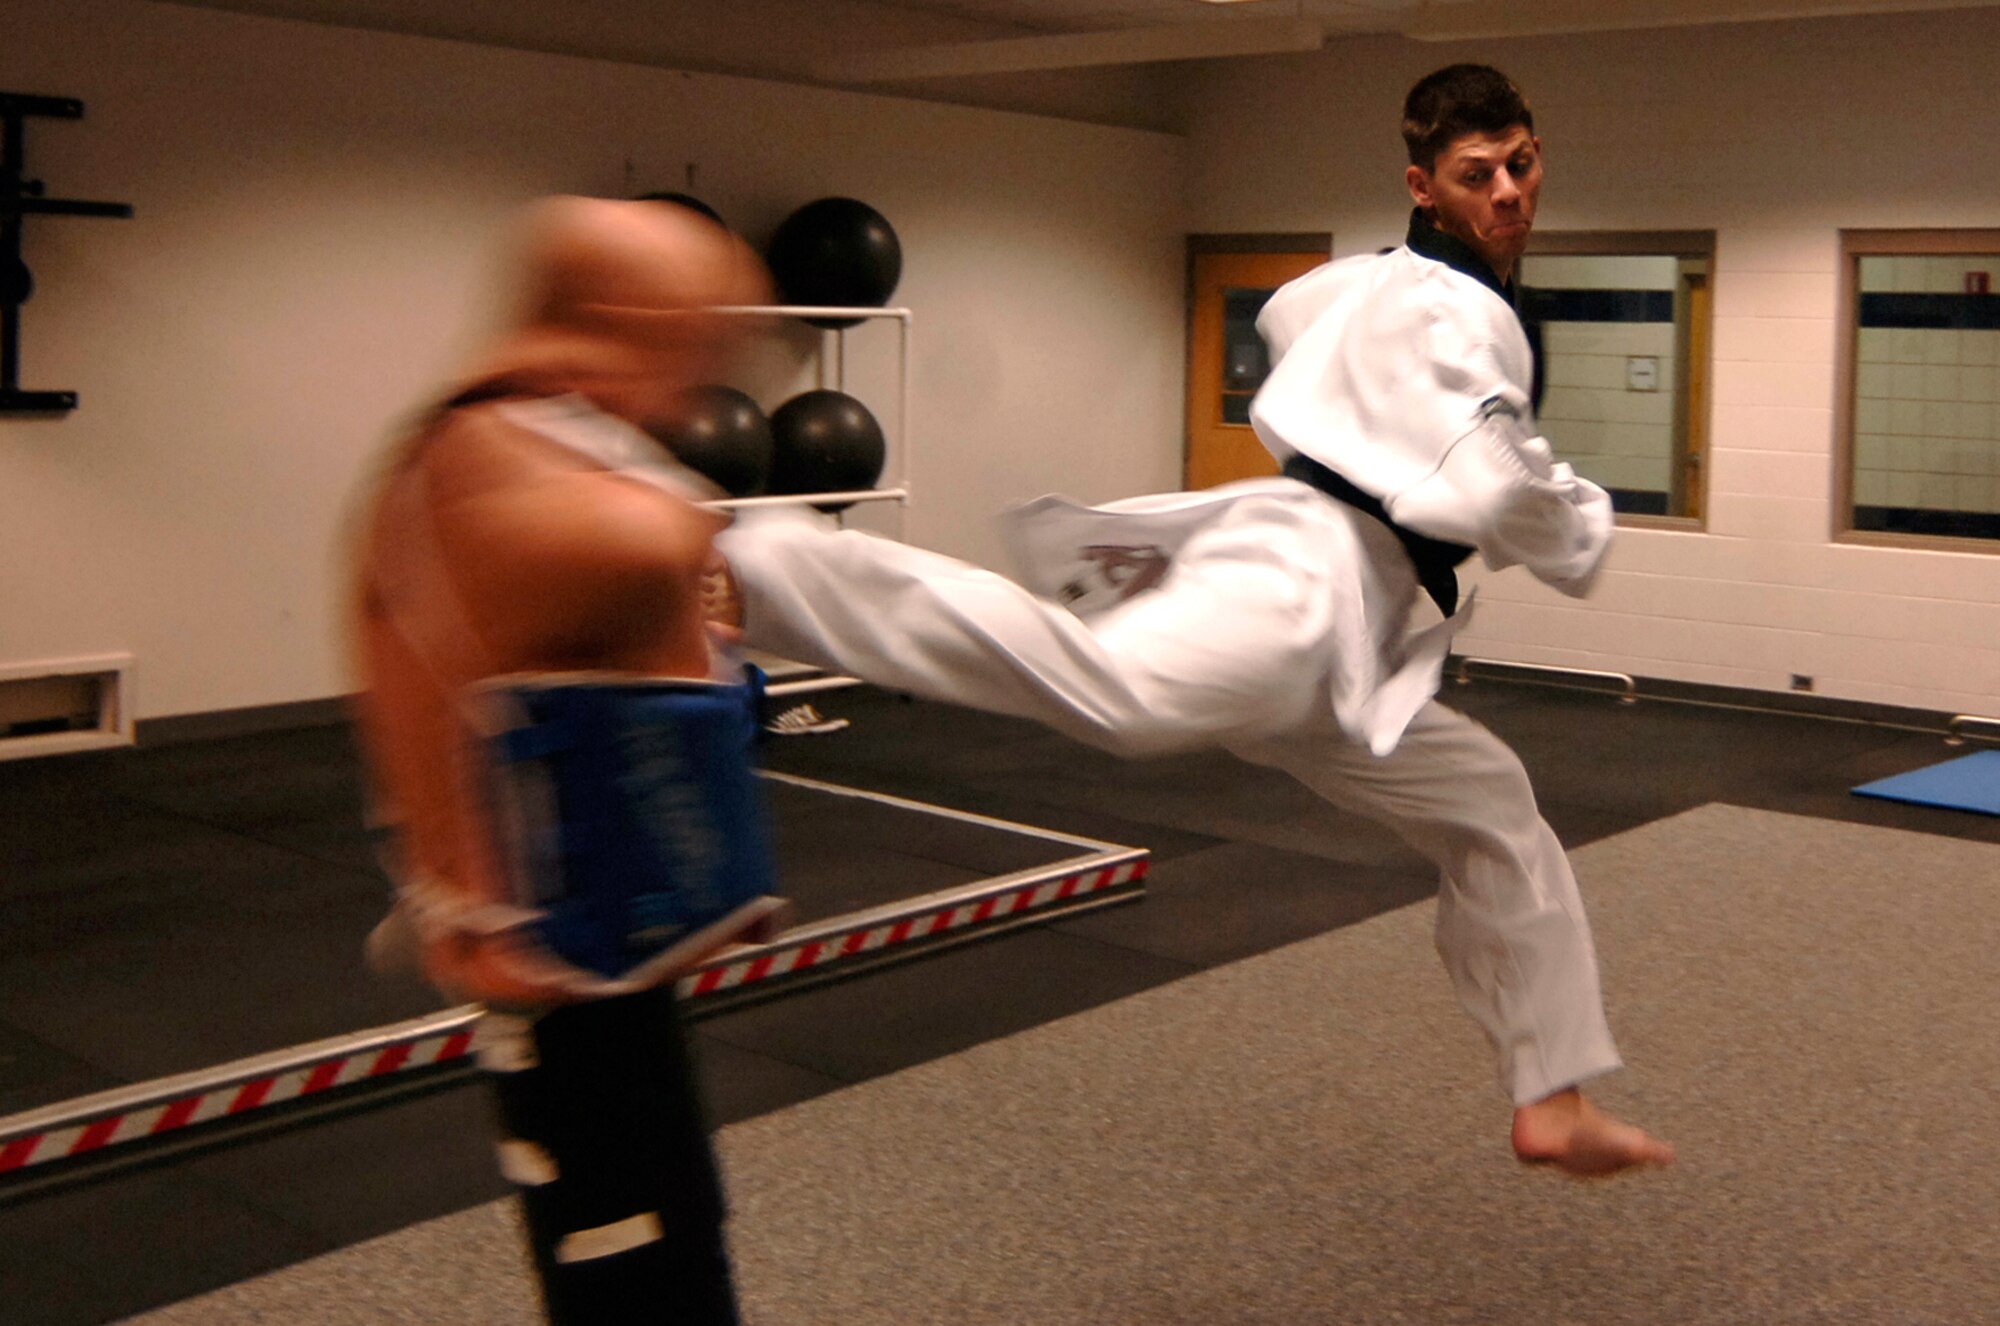 MCCONNELL AIR FORCE BASE, Kan. -- Airman 1st Class Jonathan Scherquist, 22nd Force Support Squadron, demonstrates a jumping back kick during a taekwondo training session, at the base fitness center, July 17. Airman Scherquist feels grateful for the support his family, commander, and squadron has given him to pursue his dream of being a champion taekwondo fighter. (Photo by Airman 1st Class Maria Ruiz)